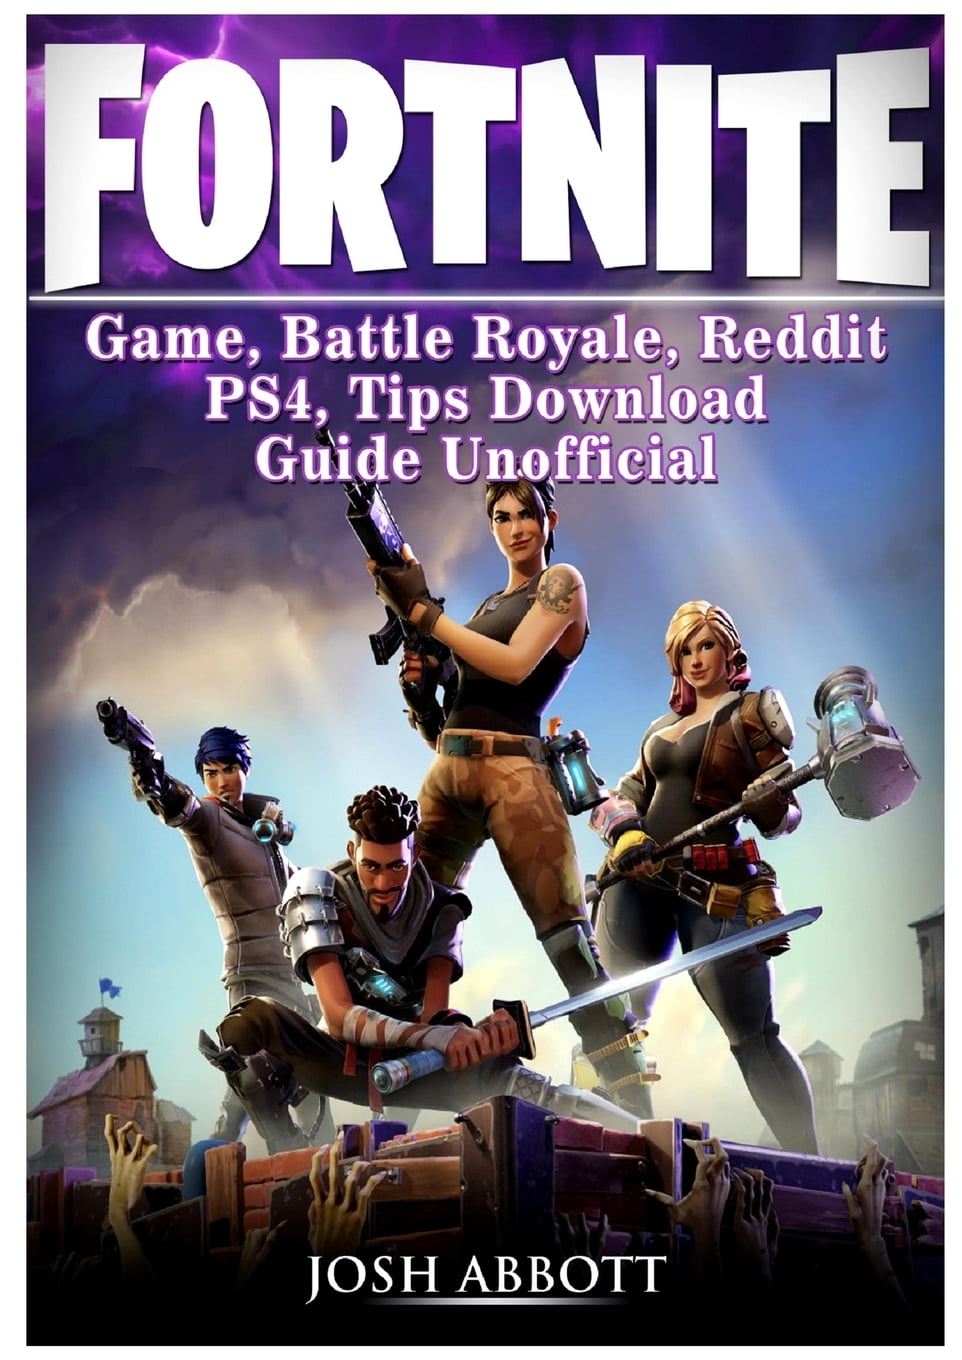 Fortnite Battle Royale, PS4, PC, Game, App, Maps, Tips, Skins, Wiki,  Updates, Achievements, Cheats, Hacks, Guide Unofficial eBook by Hse Games -  EPUB Book